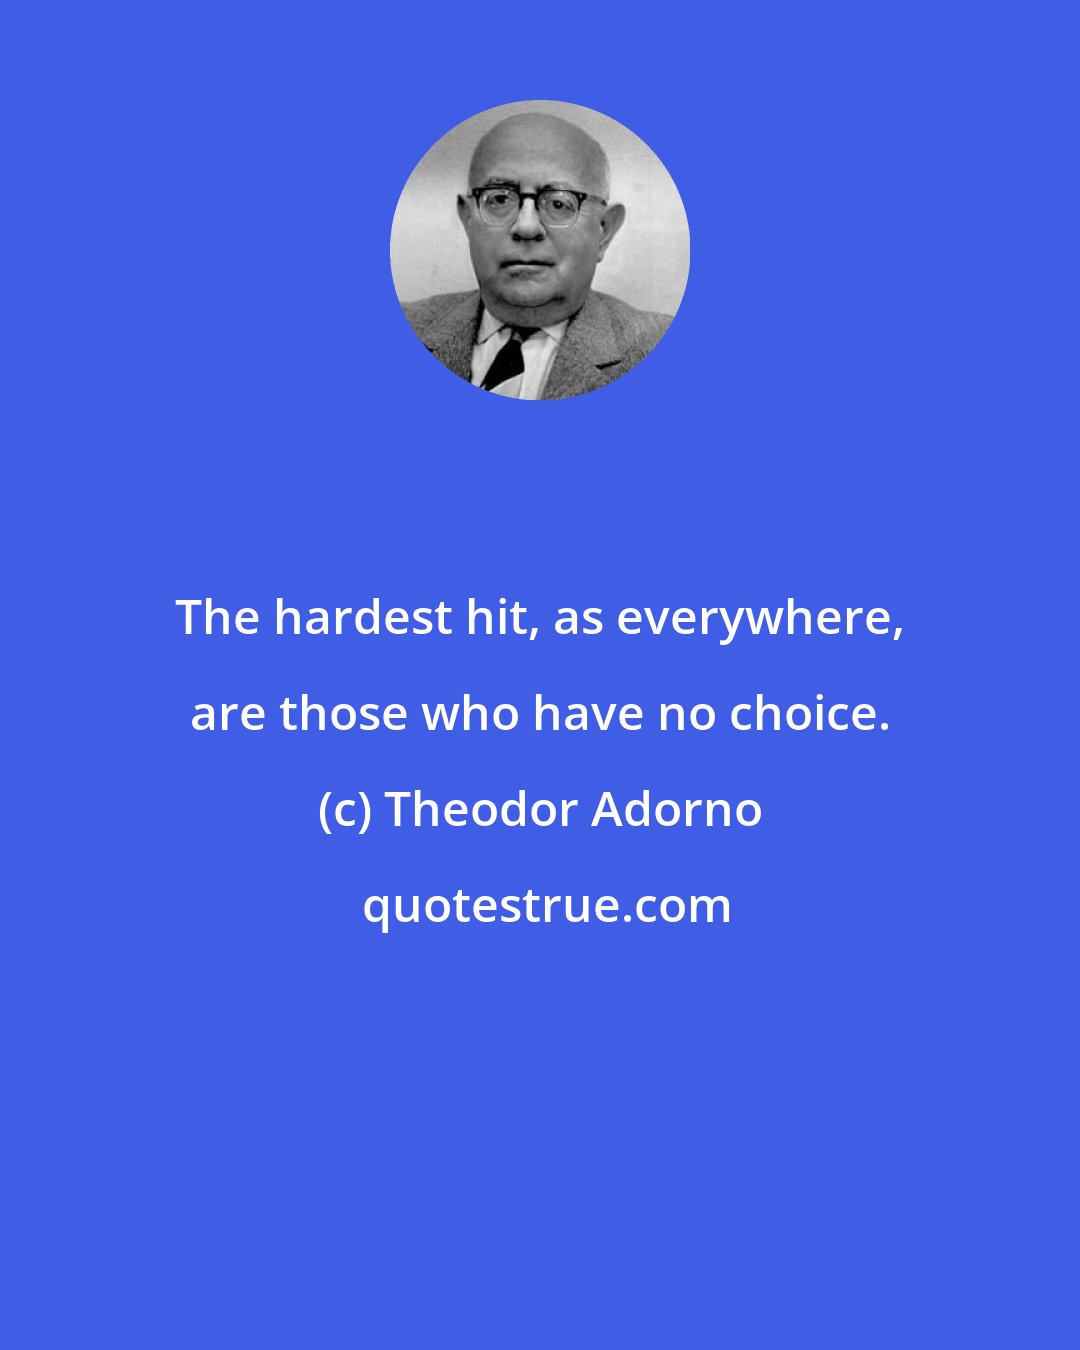 Theodor Adorno: The hardest hit, as everywhere, are those who have no choice.